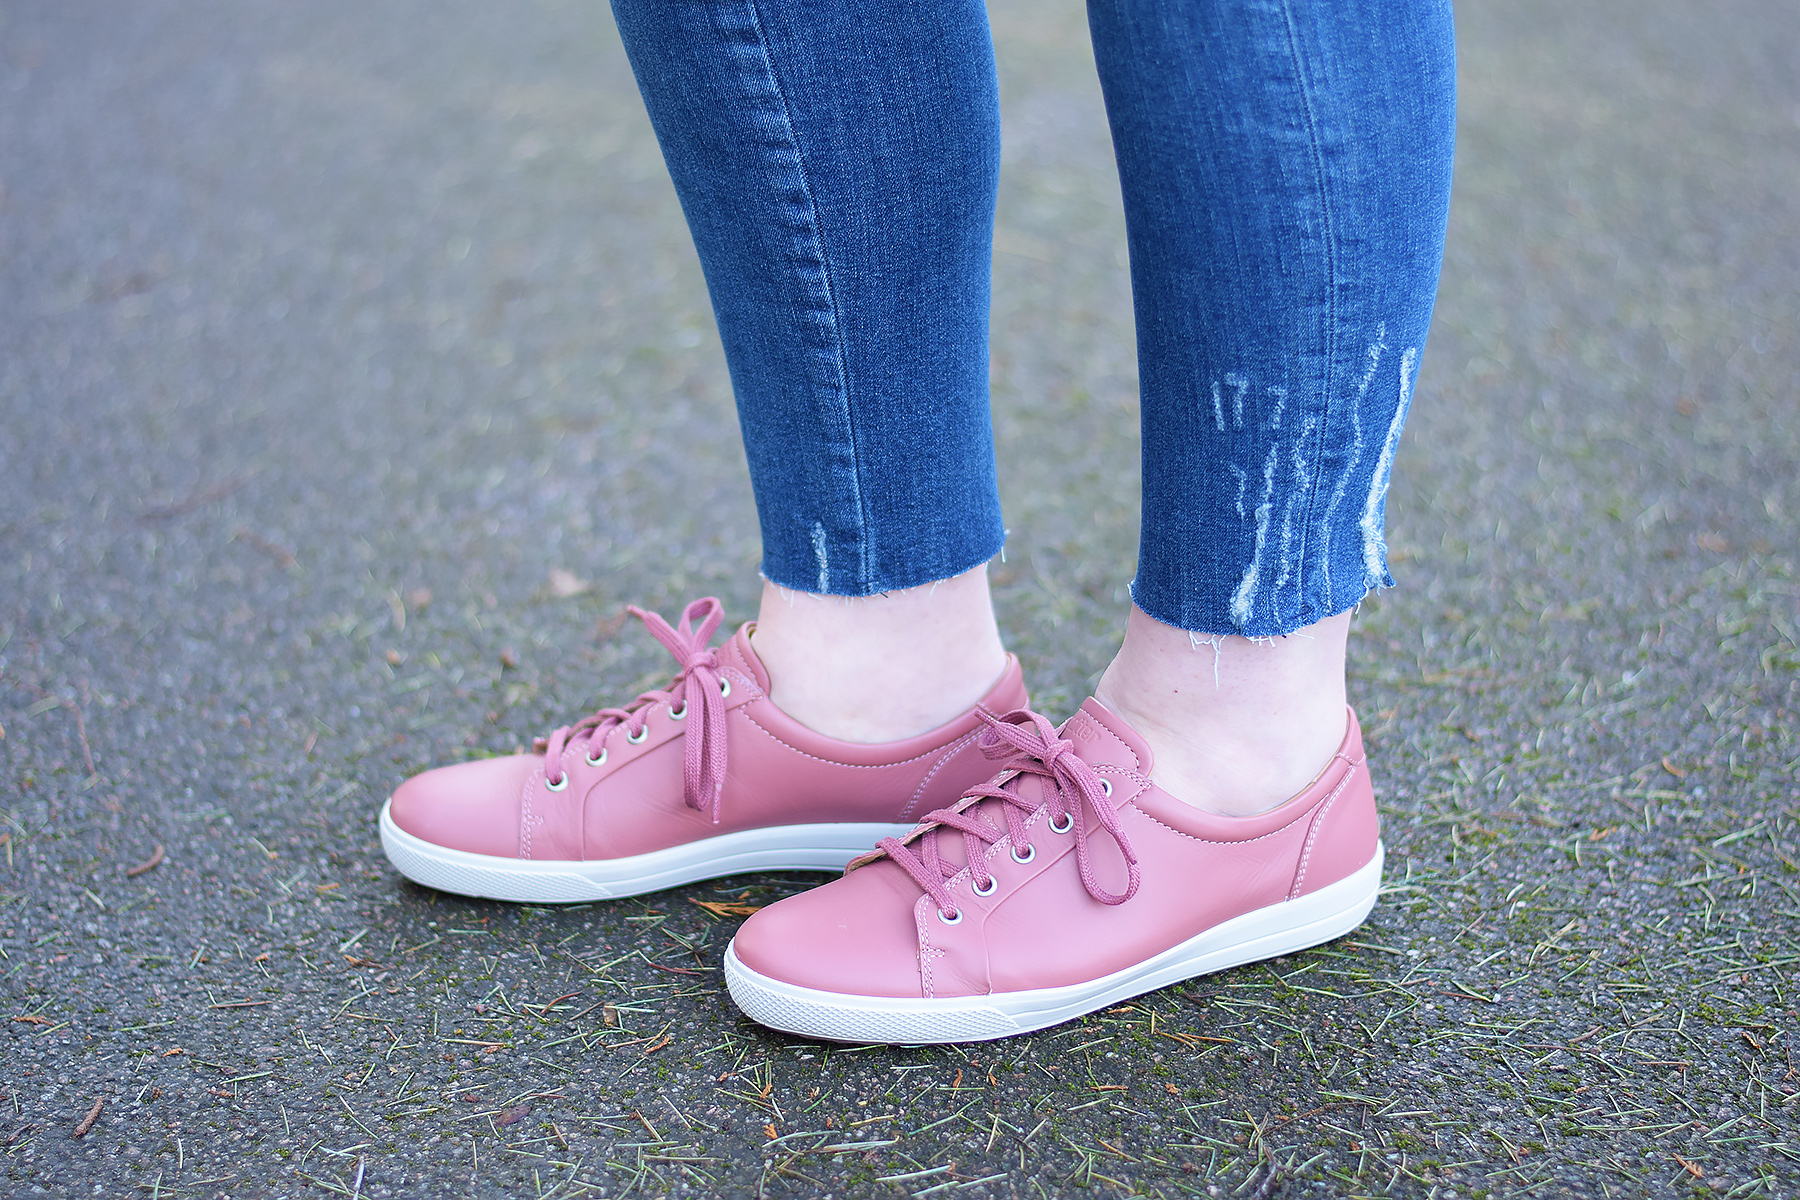 Hotter Shoes Salmon Lace up leather shoes outfit